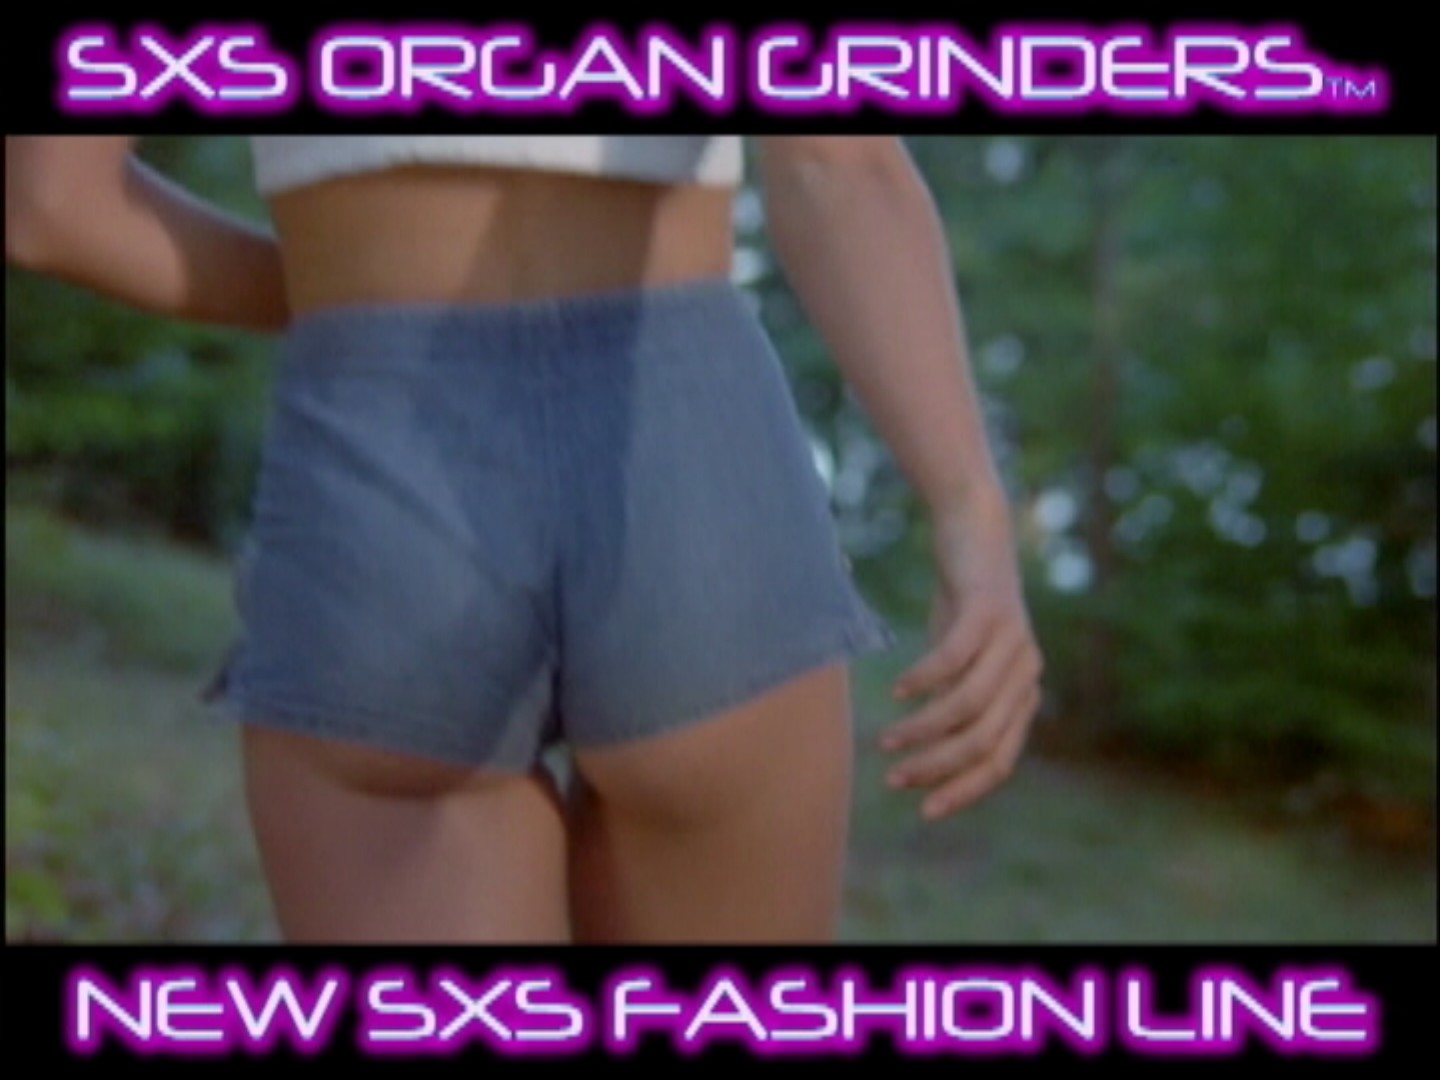 SXS FACE DANCERS™ Hot Pants! Sisters of XI Sorority Fashions! Vie de Elegance! The Most Fun A Rich Kid Can Wear!™ 